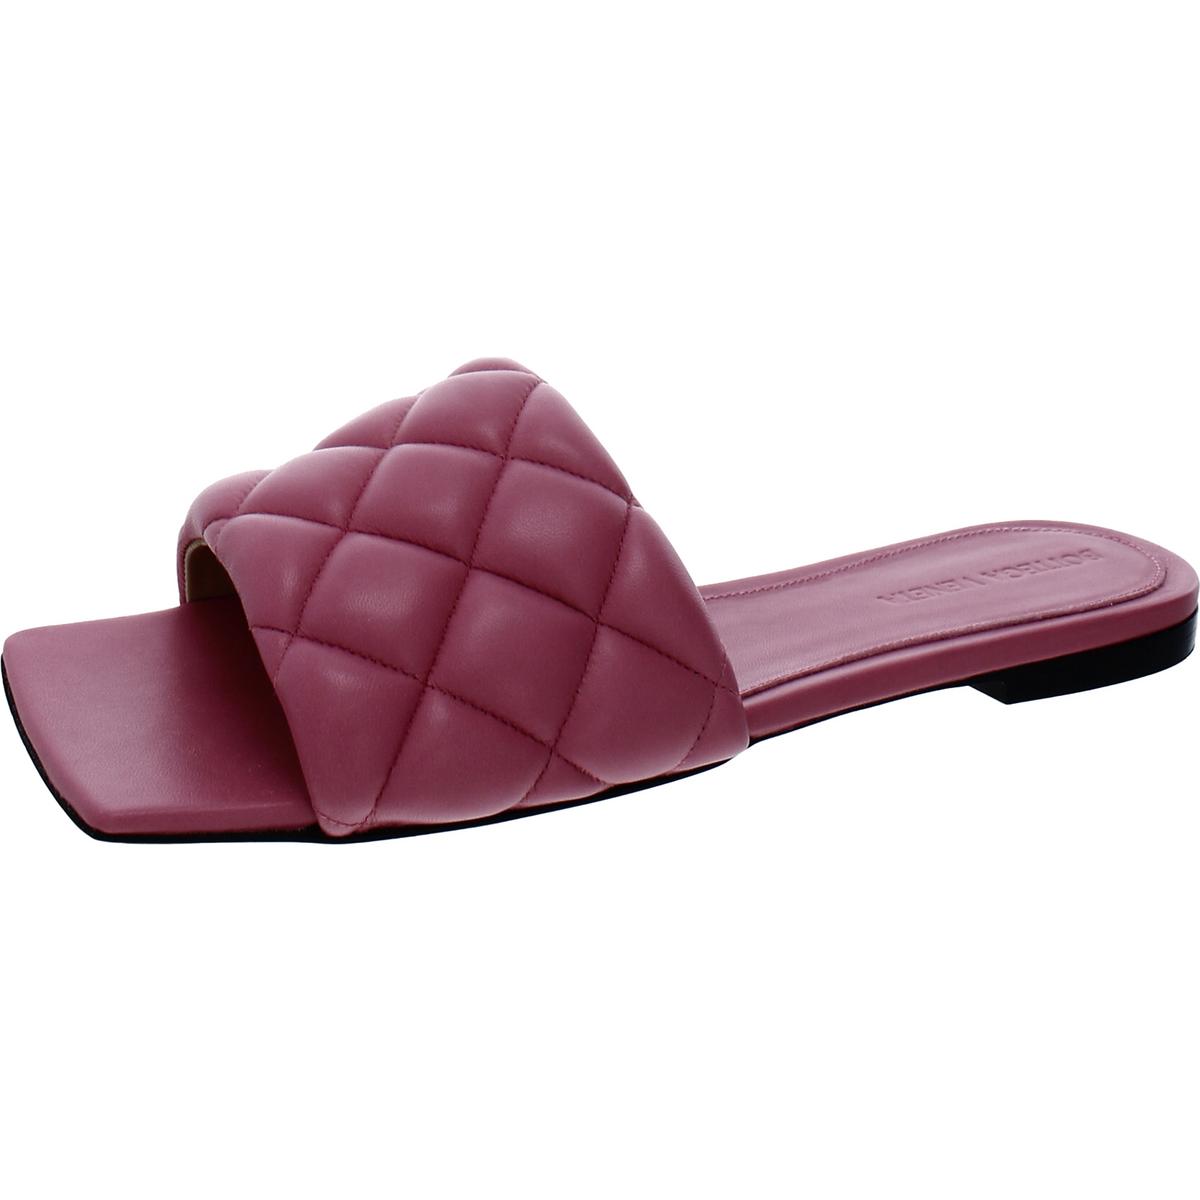 Pre-owned Bottega Veneta Womens Leather Quilted Slip-on Slide Sandals Shoes Bhfo 3591 In Azelea